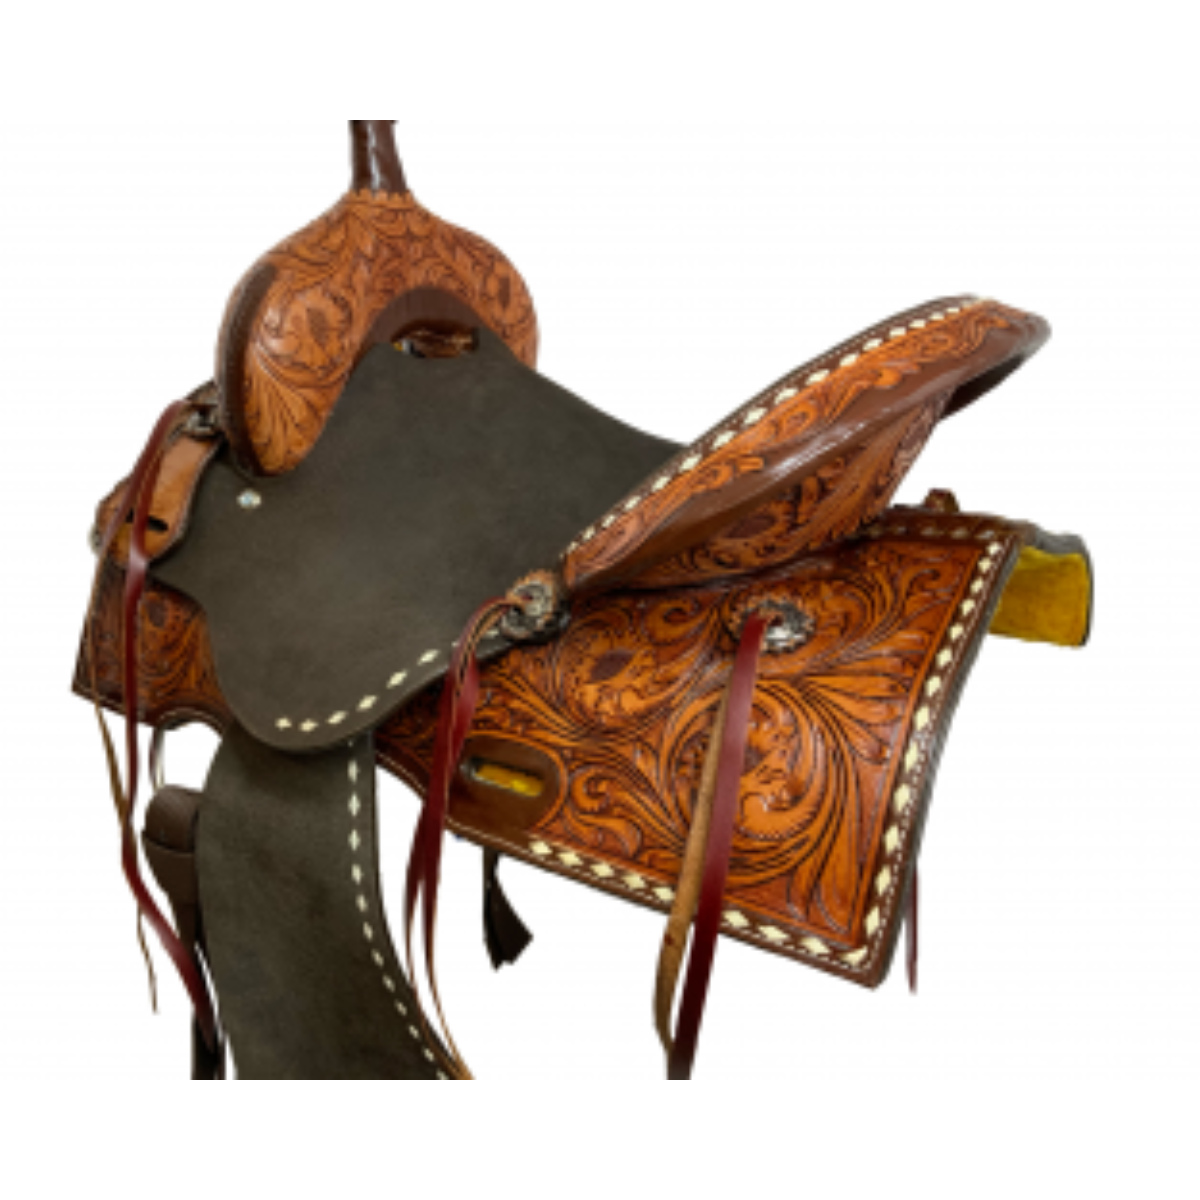 14", 15", 16" Double T Roughout Barrel Saddle With Floral Tooling and White Buckstitching. - Double T Saddles